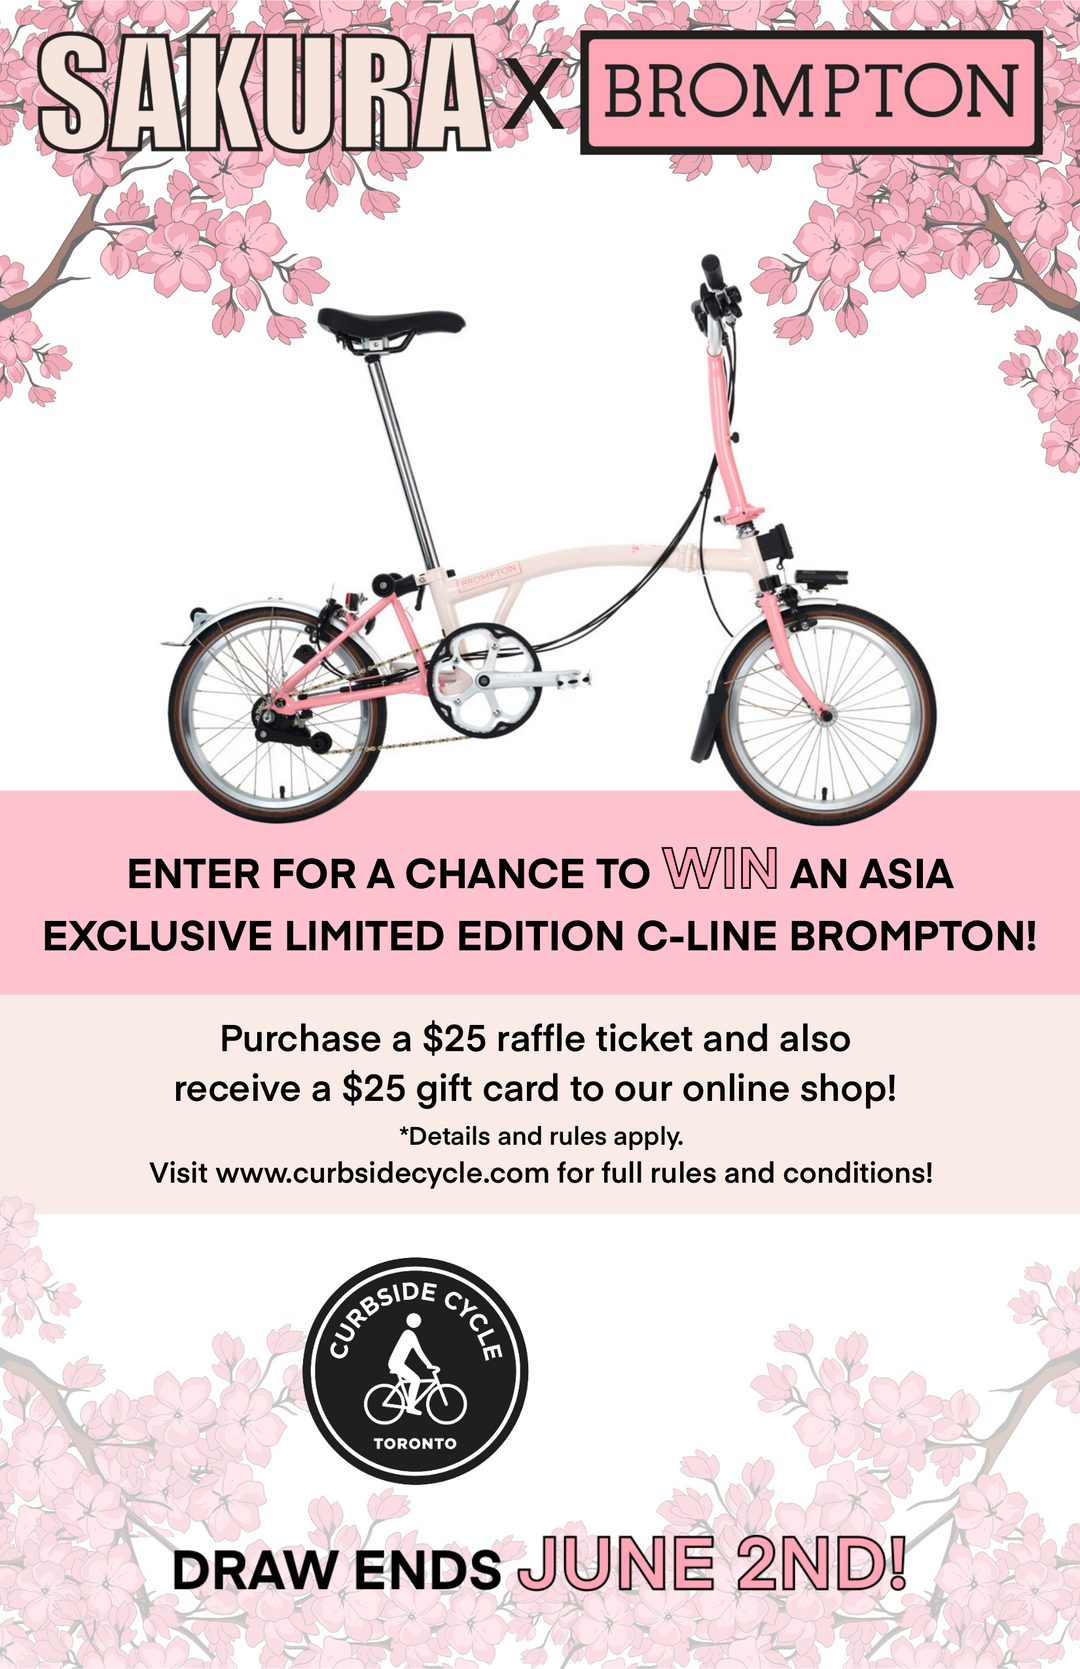 Flyer for Sakura x Brompton Raffle. Image of a Brompton with illustrated cherry blossoms. Text reads "Sakura x Brompton. Enter for a chance to win an Asia exclusive limited edition c-line Brompton. Purchase a $25 raffle ticket and also receive a $25 gift card to our online shop! *Details and rules apply. Draw ends June 2nd.